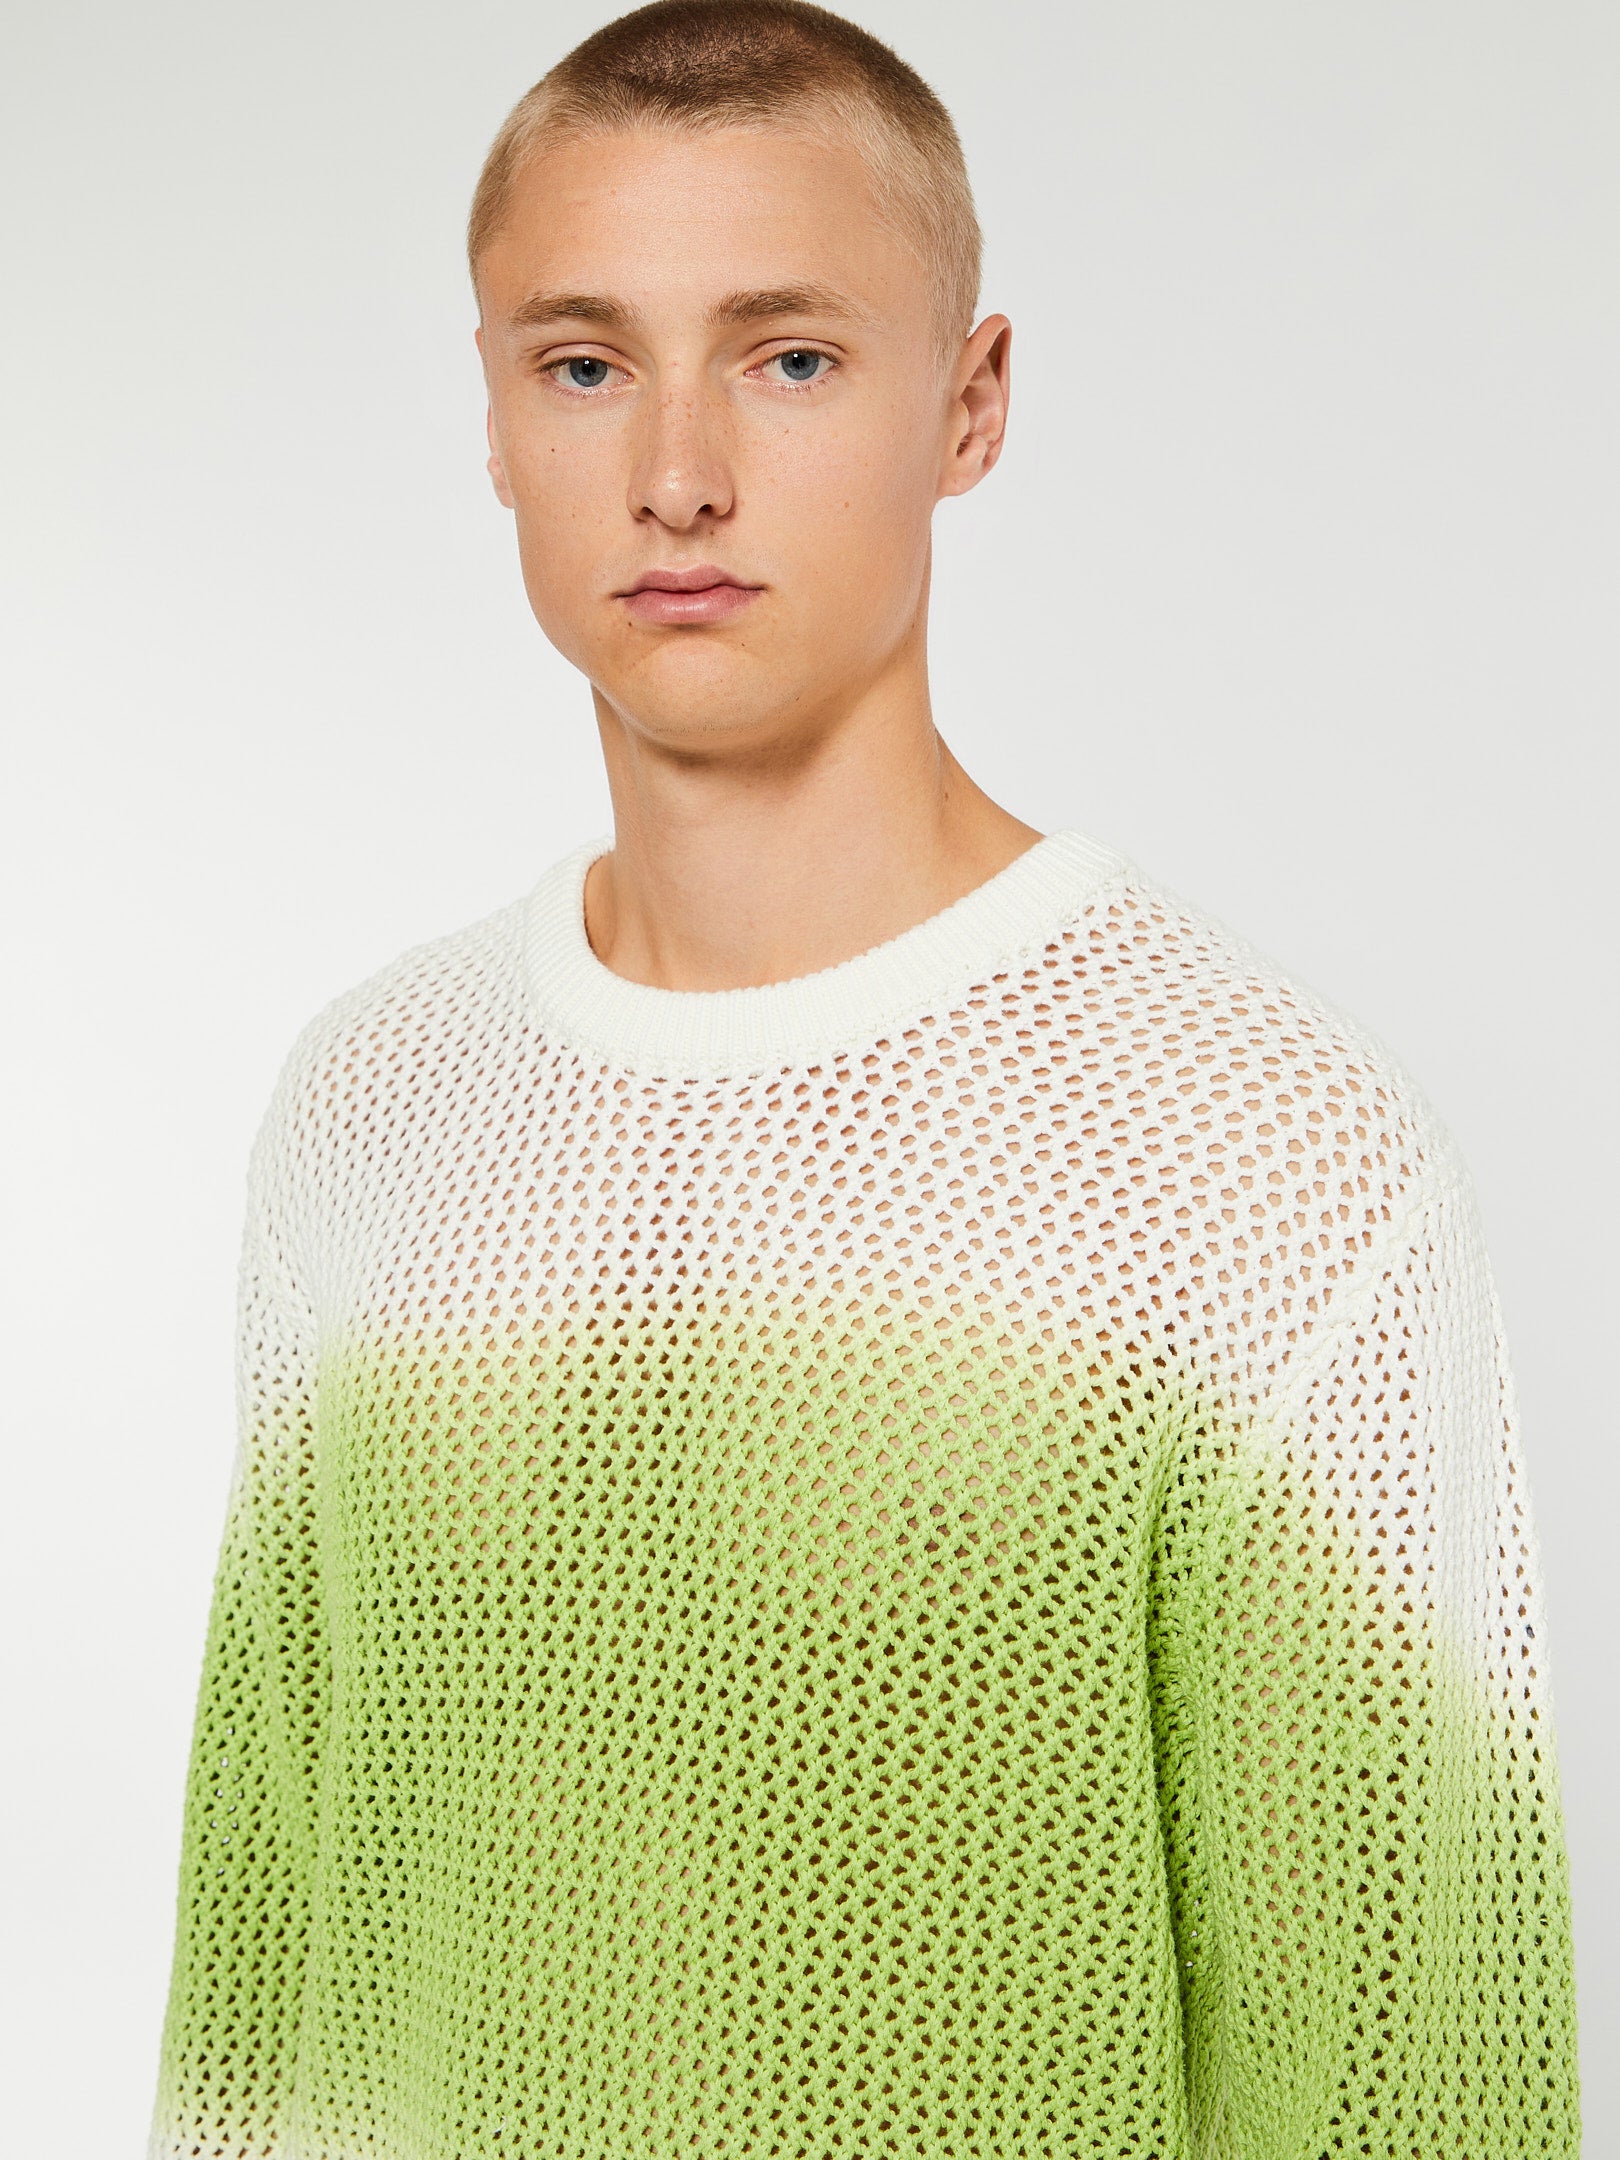 Pigment Dyed Loose Gauge Sweater in Bright Green